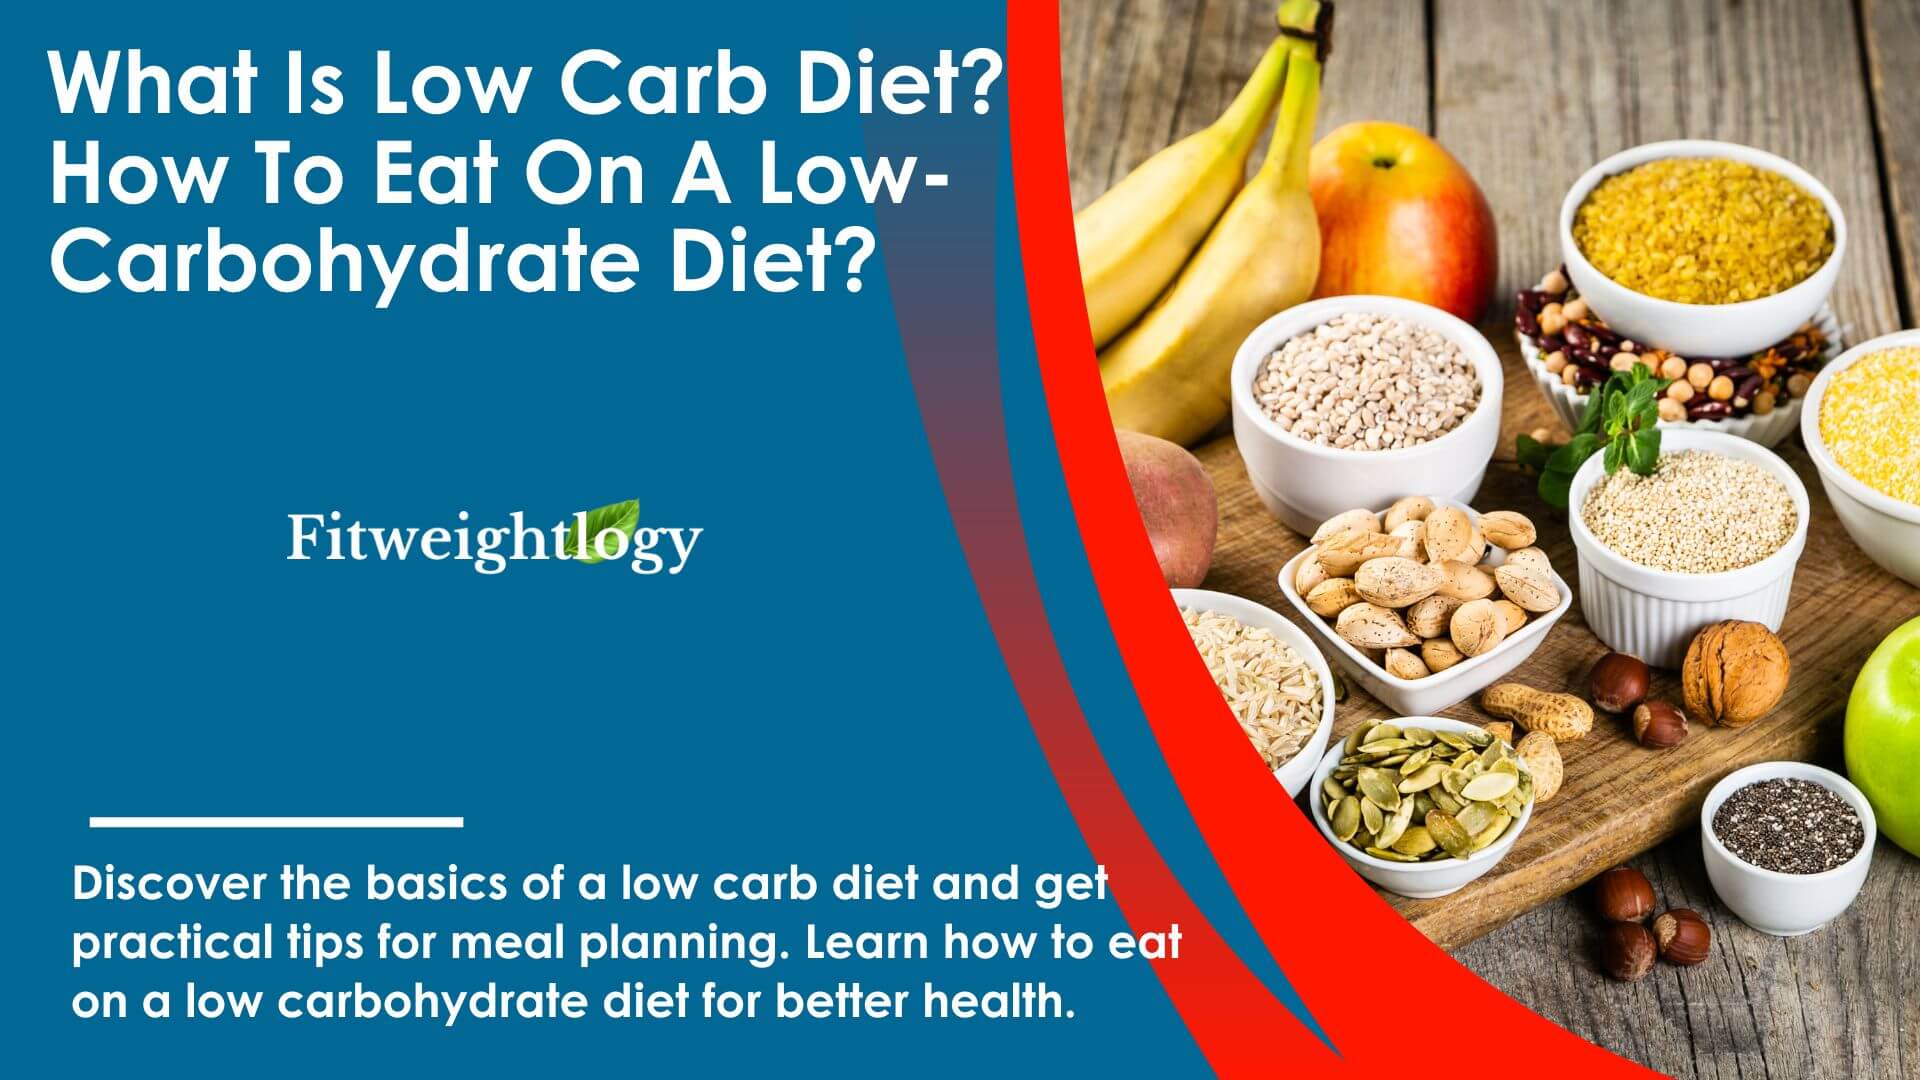 Fitweightlogy - What is low carb diet? How to Eat On A Low-Carbohydrate Diet?